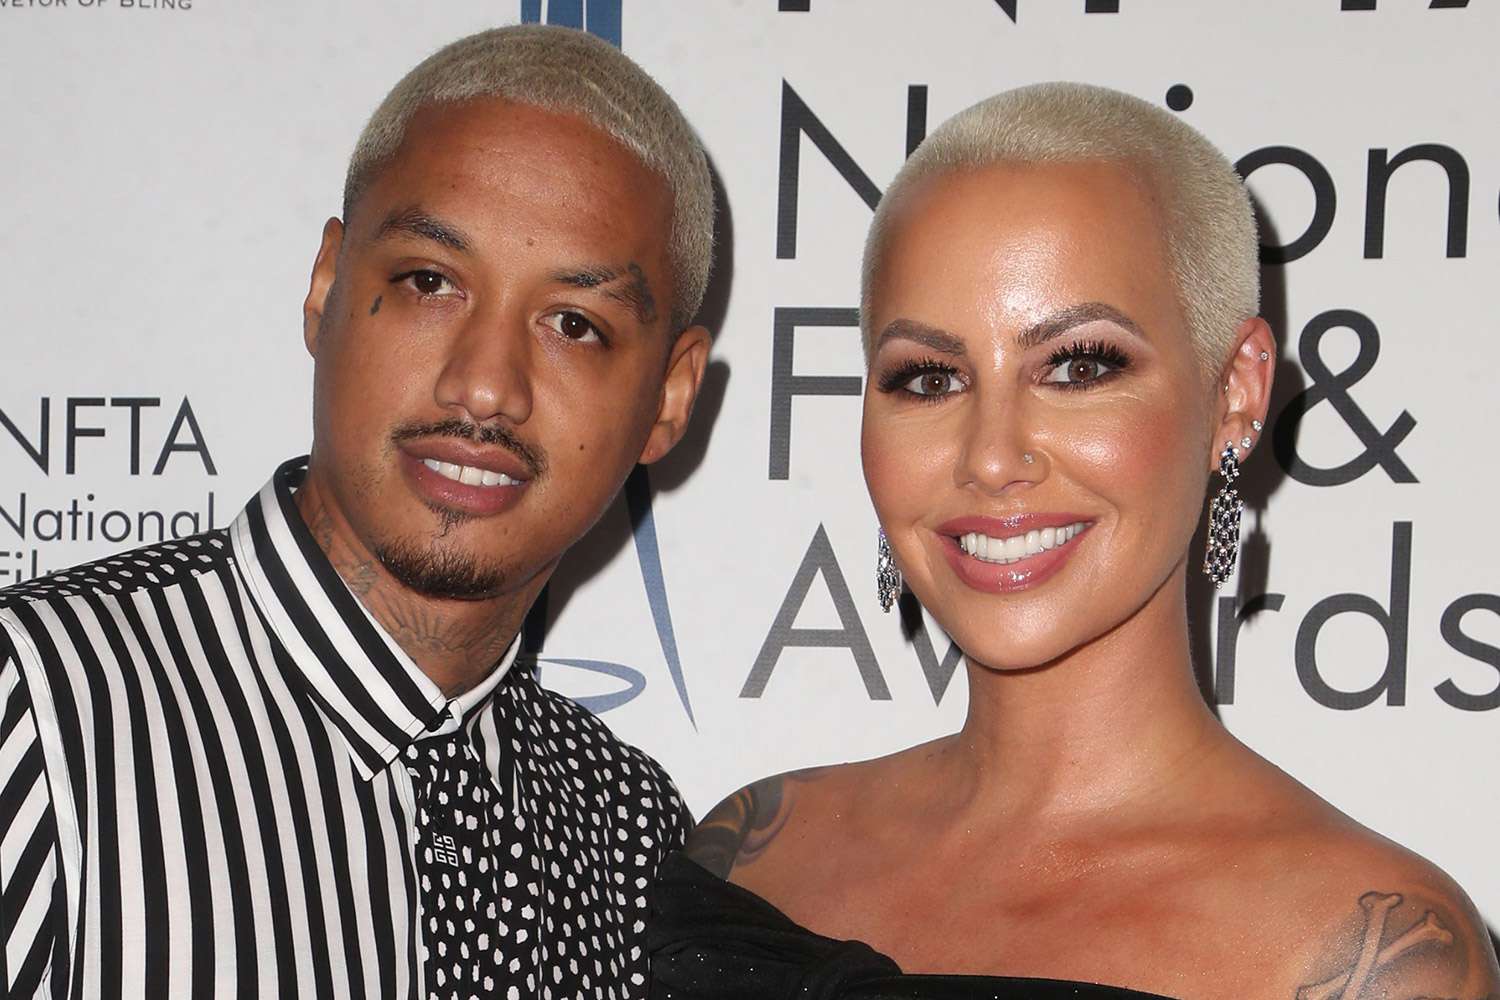 Amber Rose Accuses Partner Alexander 'AE' Edwards of Cheating: 'I've Been Suffering in Silence'